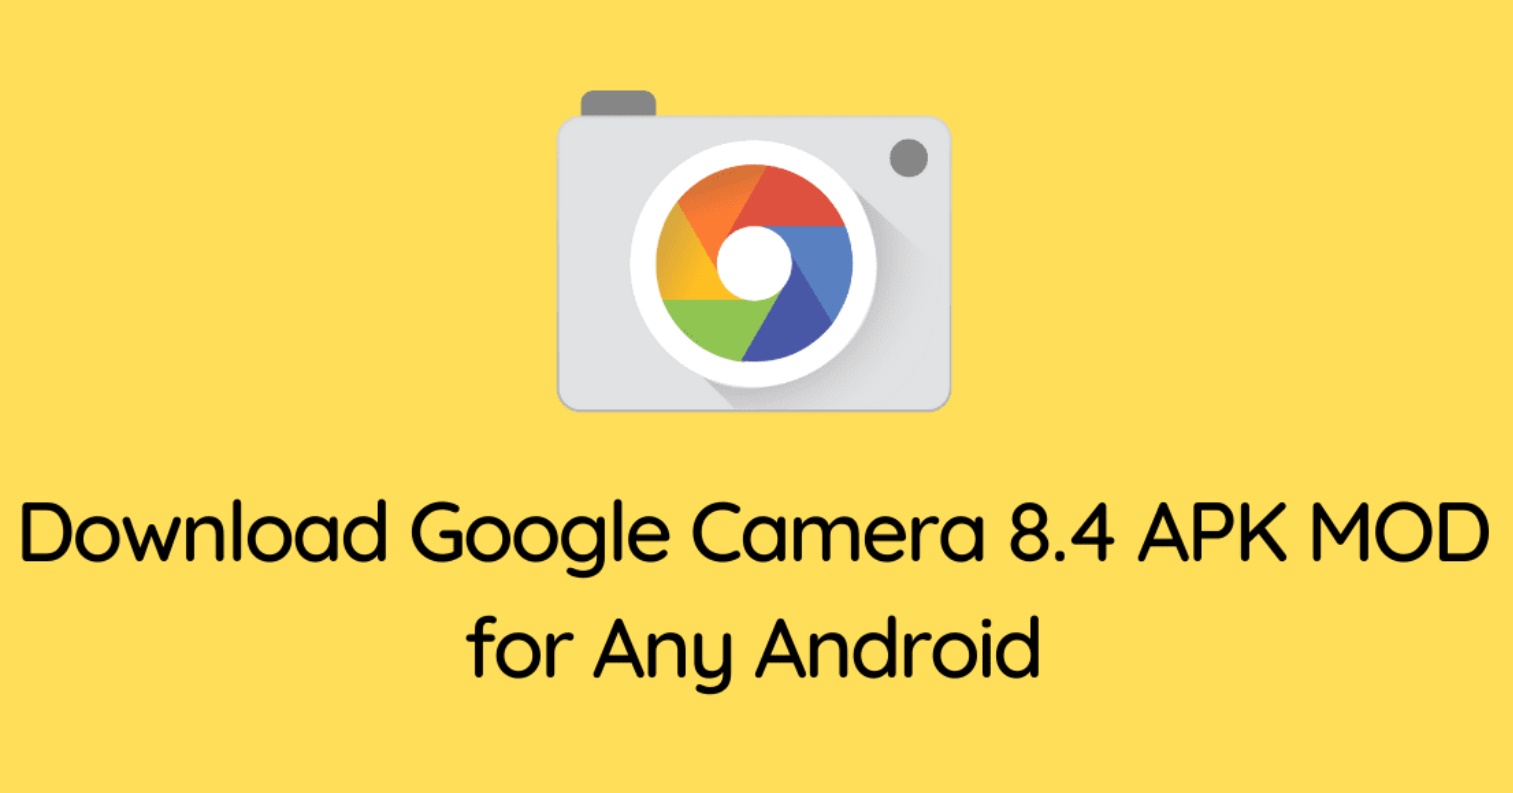 Google Camera APK Download for Android 12